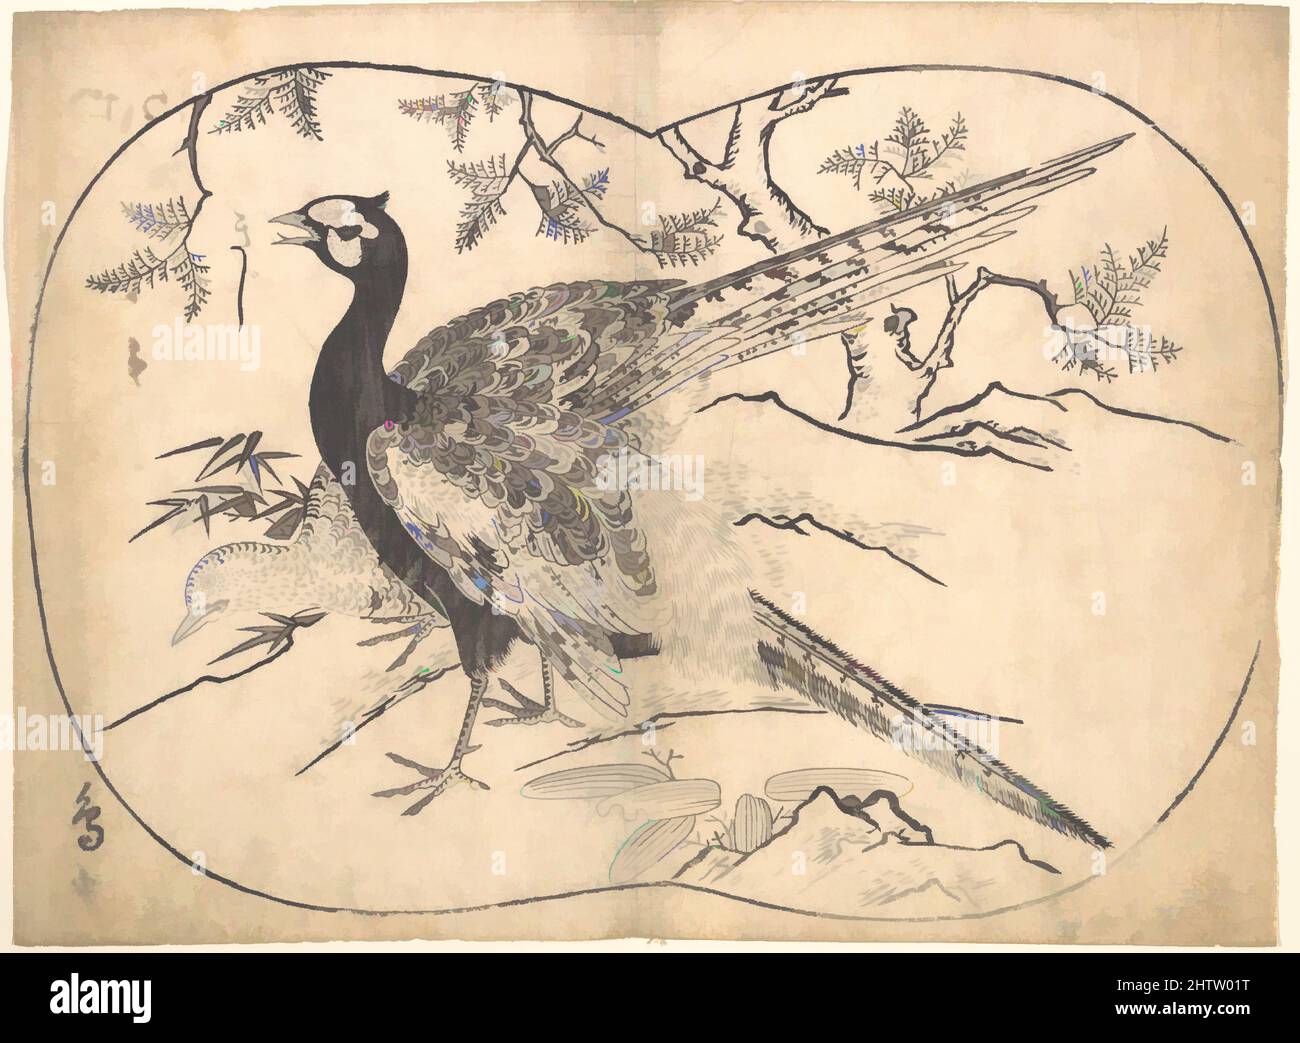 Art inspired by Pheasants, Edo period (1615–1868), Japan, Monochrome woodblock print; ink on paper, 9 5/8 x 13 in. (24.4 x 33 cm), Prints, Hishikawa Moronobu (Japanese, died 1694, Classic works modernized by Artotop with a splash of modernity. Shapes, color and value, eye-catching visual impact on art. Emotions through freedom of artworks in a contemporary way. A timeless message pursuing a wildly creative new direction. Artists turning to the digital medium and creating the Artotop NFT Stock Photo